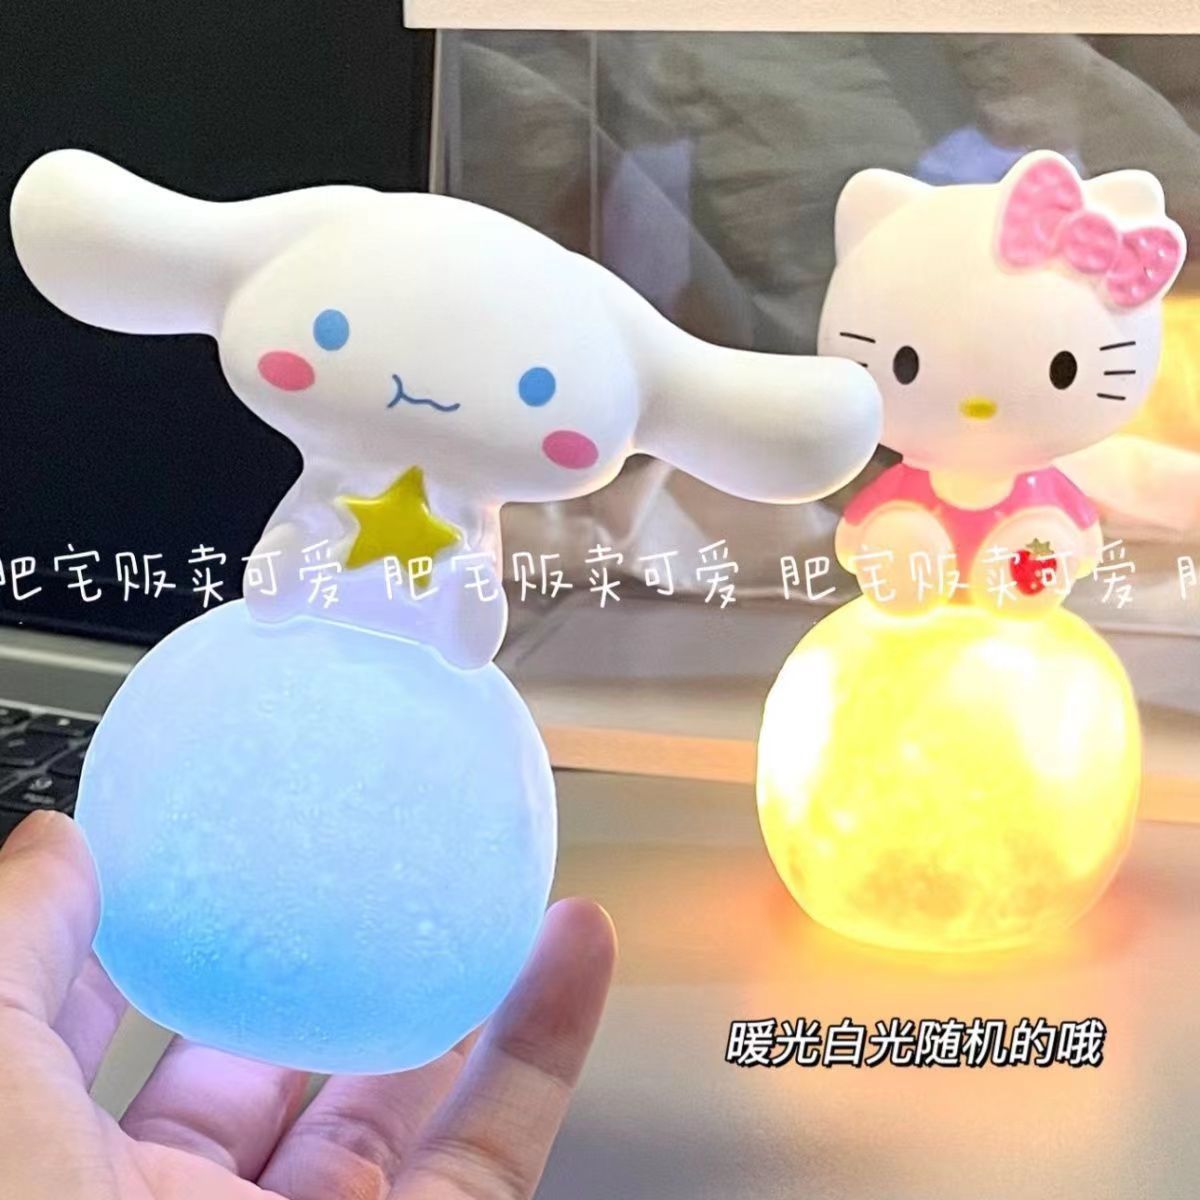 Uncanny Brands Hello Kitty and Friends 'Cinnamoroll' Light Blue